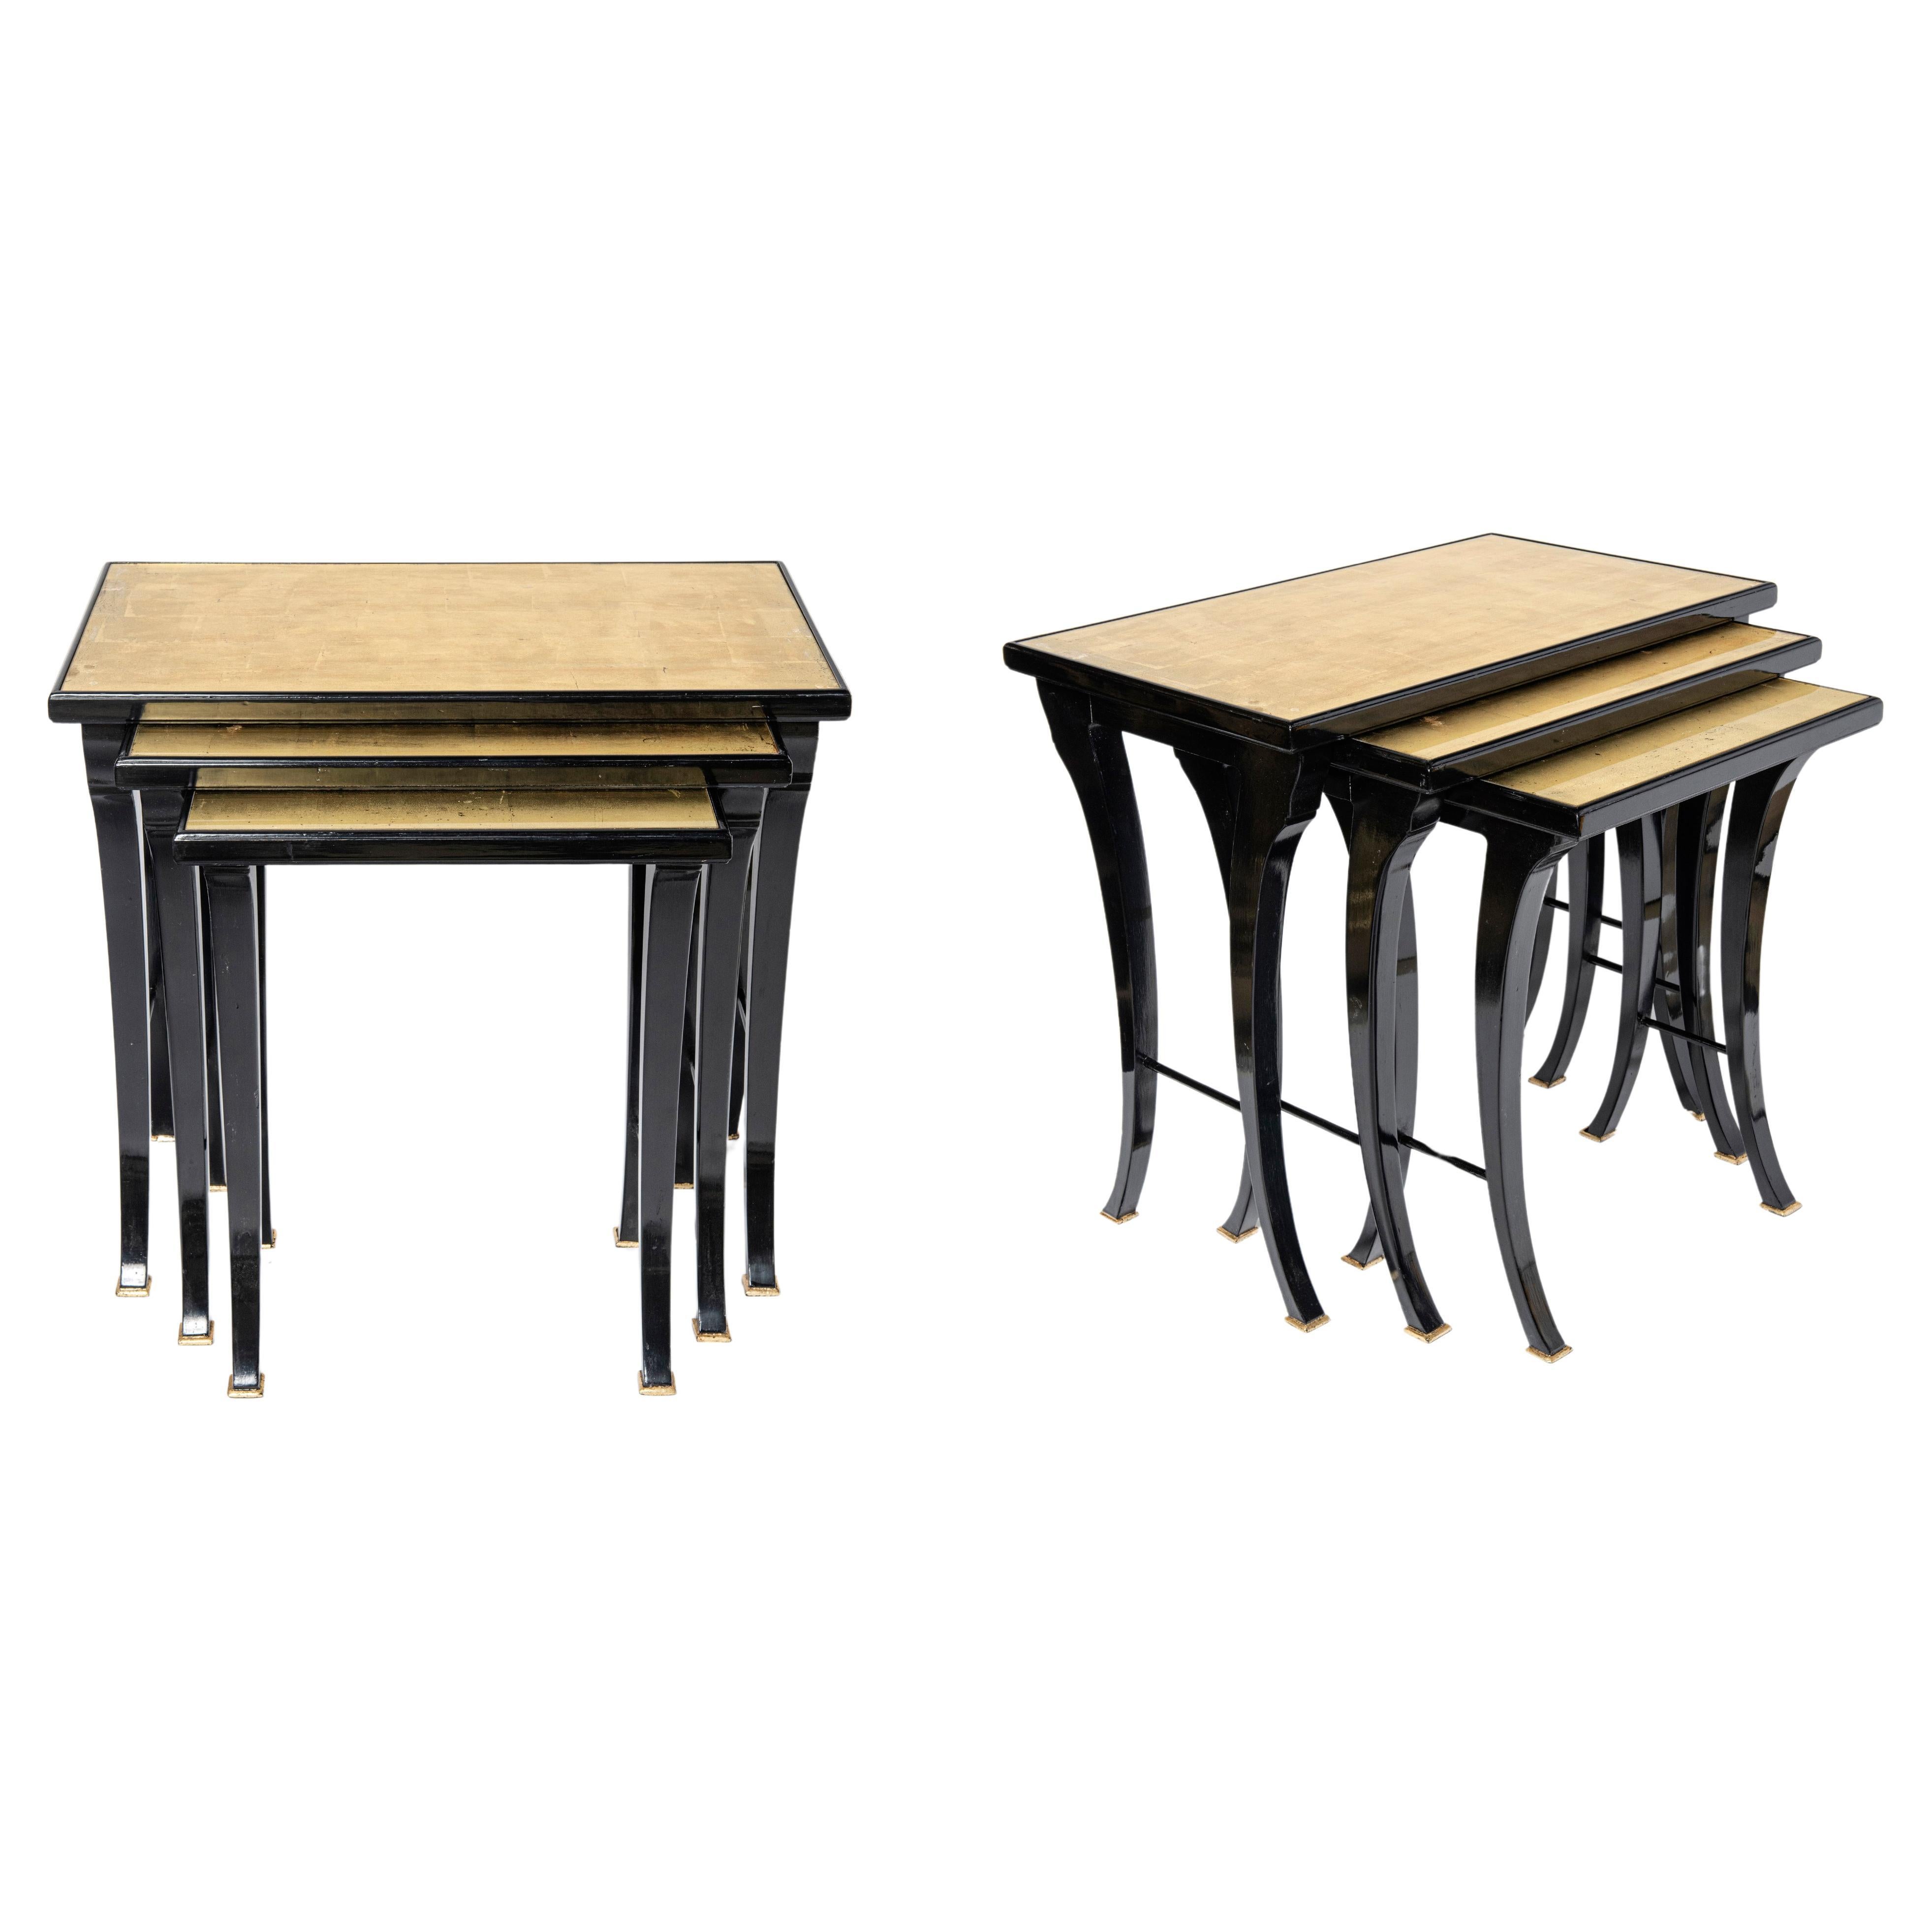 Pair of wood, glass and gold leaf nest tables by Maison Jansen. France, c. 1950. For Sale